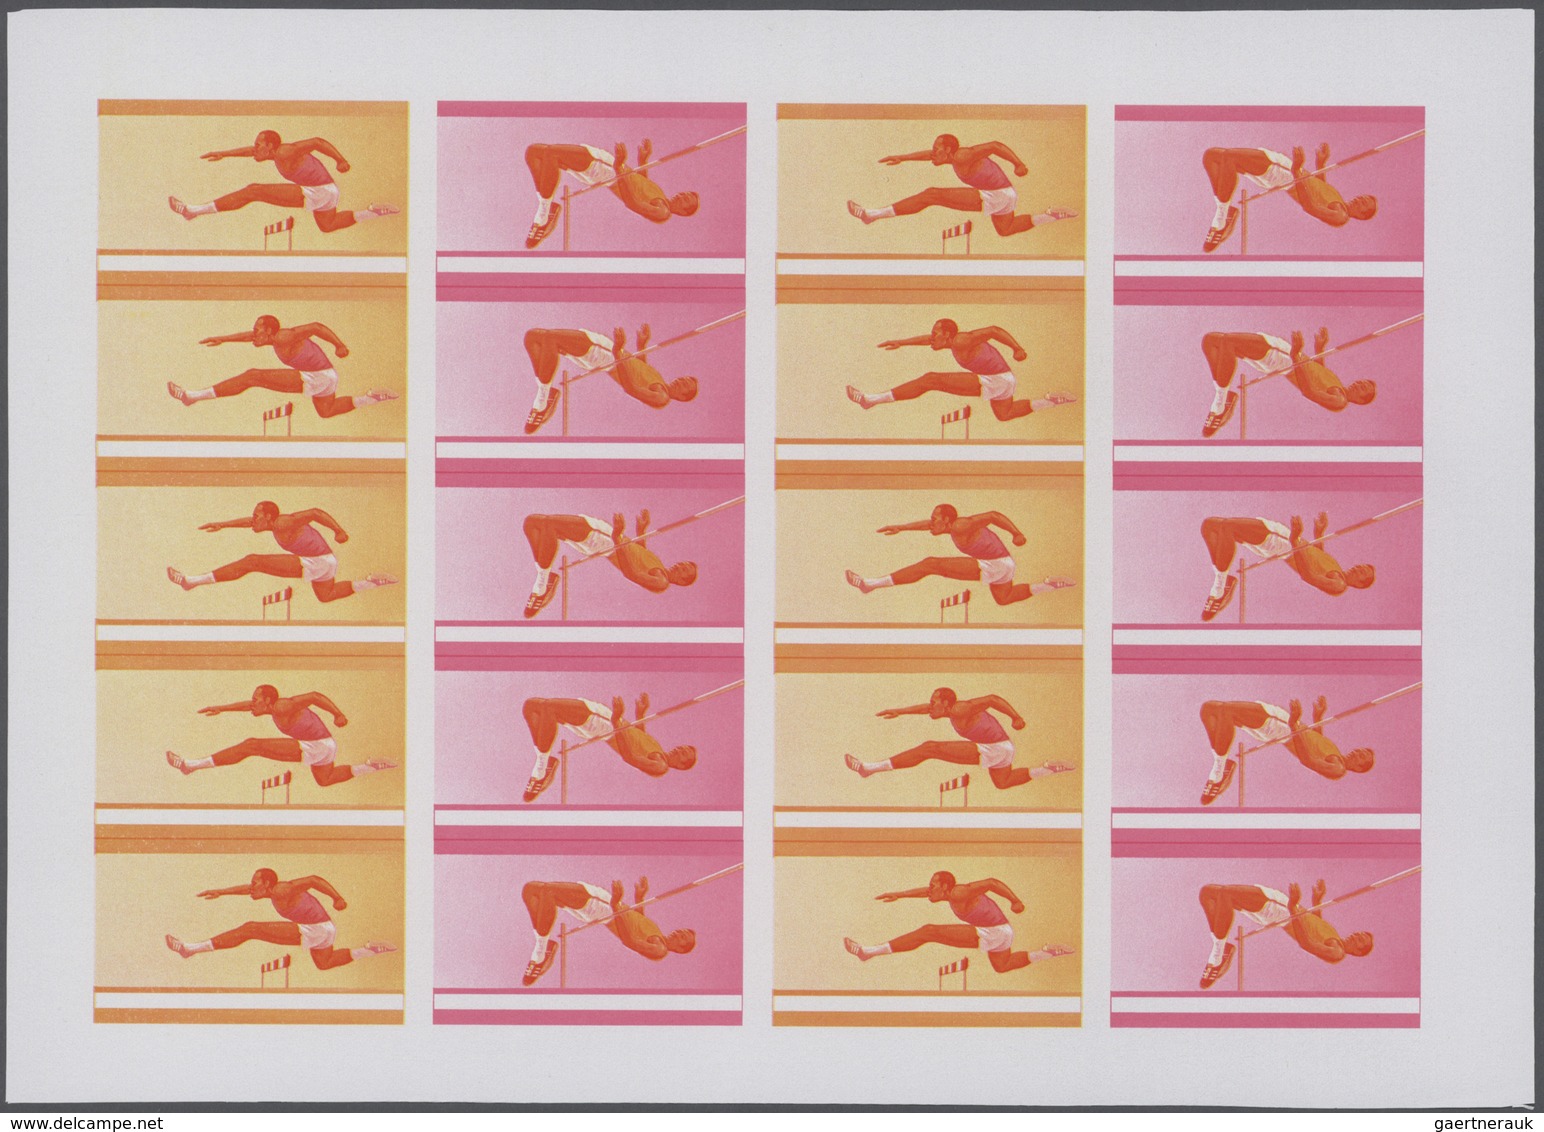 25323 Thematik: Olympische Spiele / olympic games: 1976, Burundi. Progressive proofs set of sheets for the